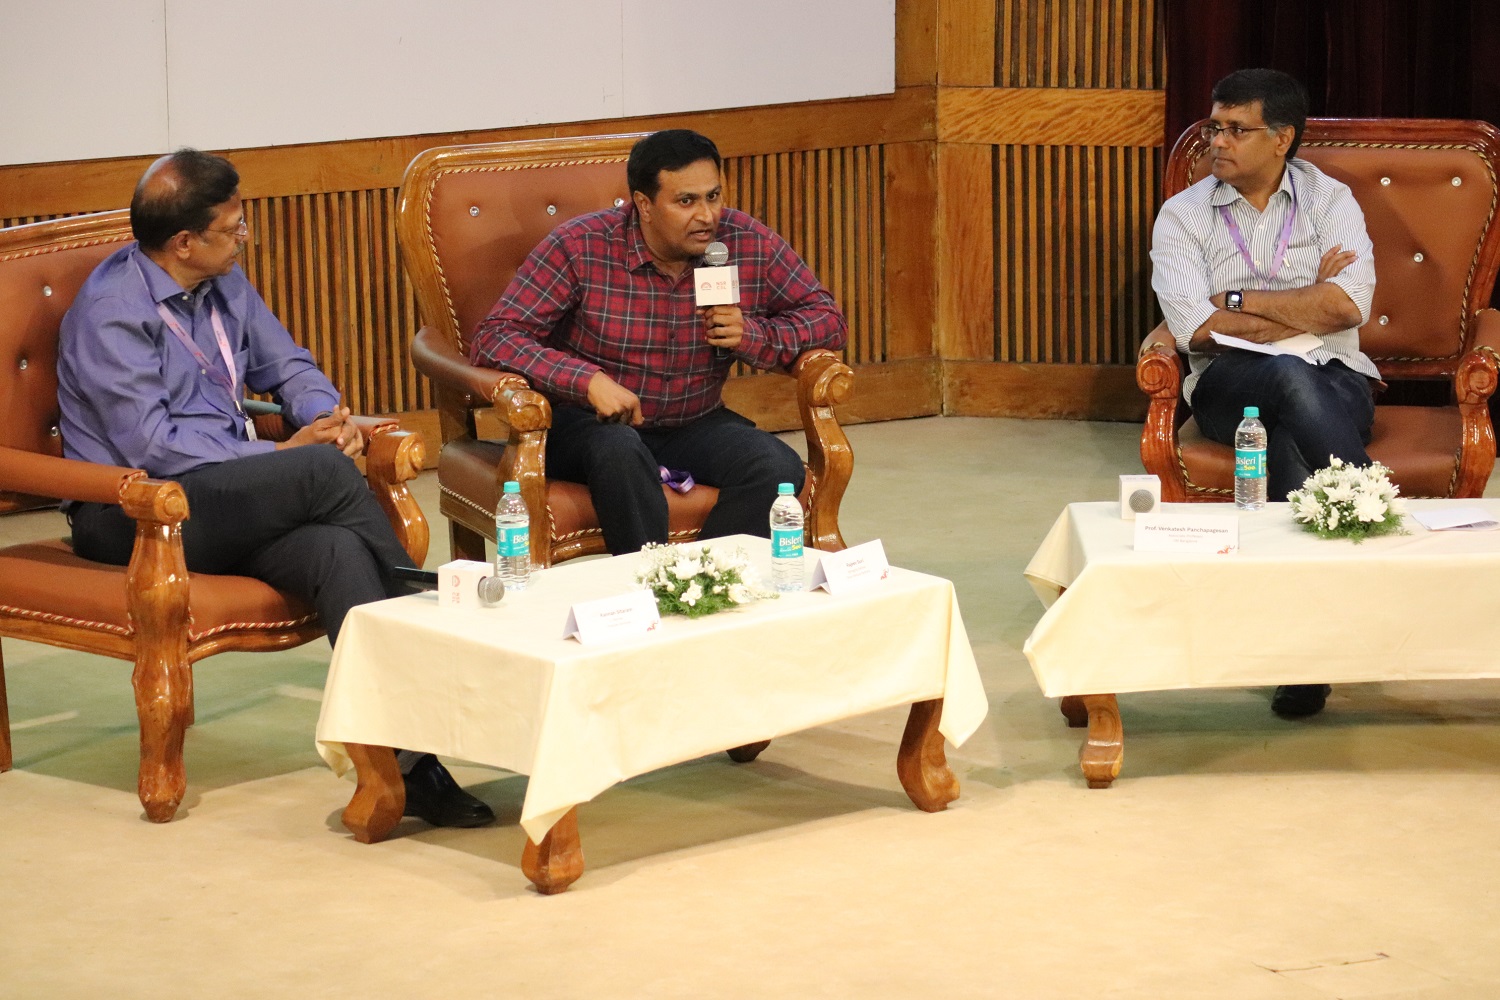 DSG Kannan Sitaram, Fireside Ventures; Rajeev Suri, Orios Venture Partners and Prof. Venkatesh Panchapagesan, faculty from the Finance & Accounting area, IIMB, at the panel discussion on ‘Fund-raising in the current economic climate’.